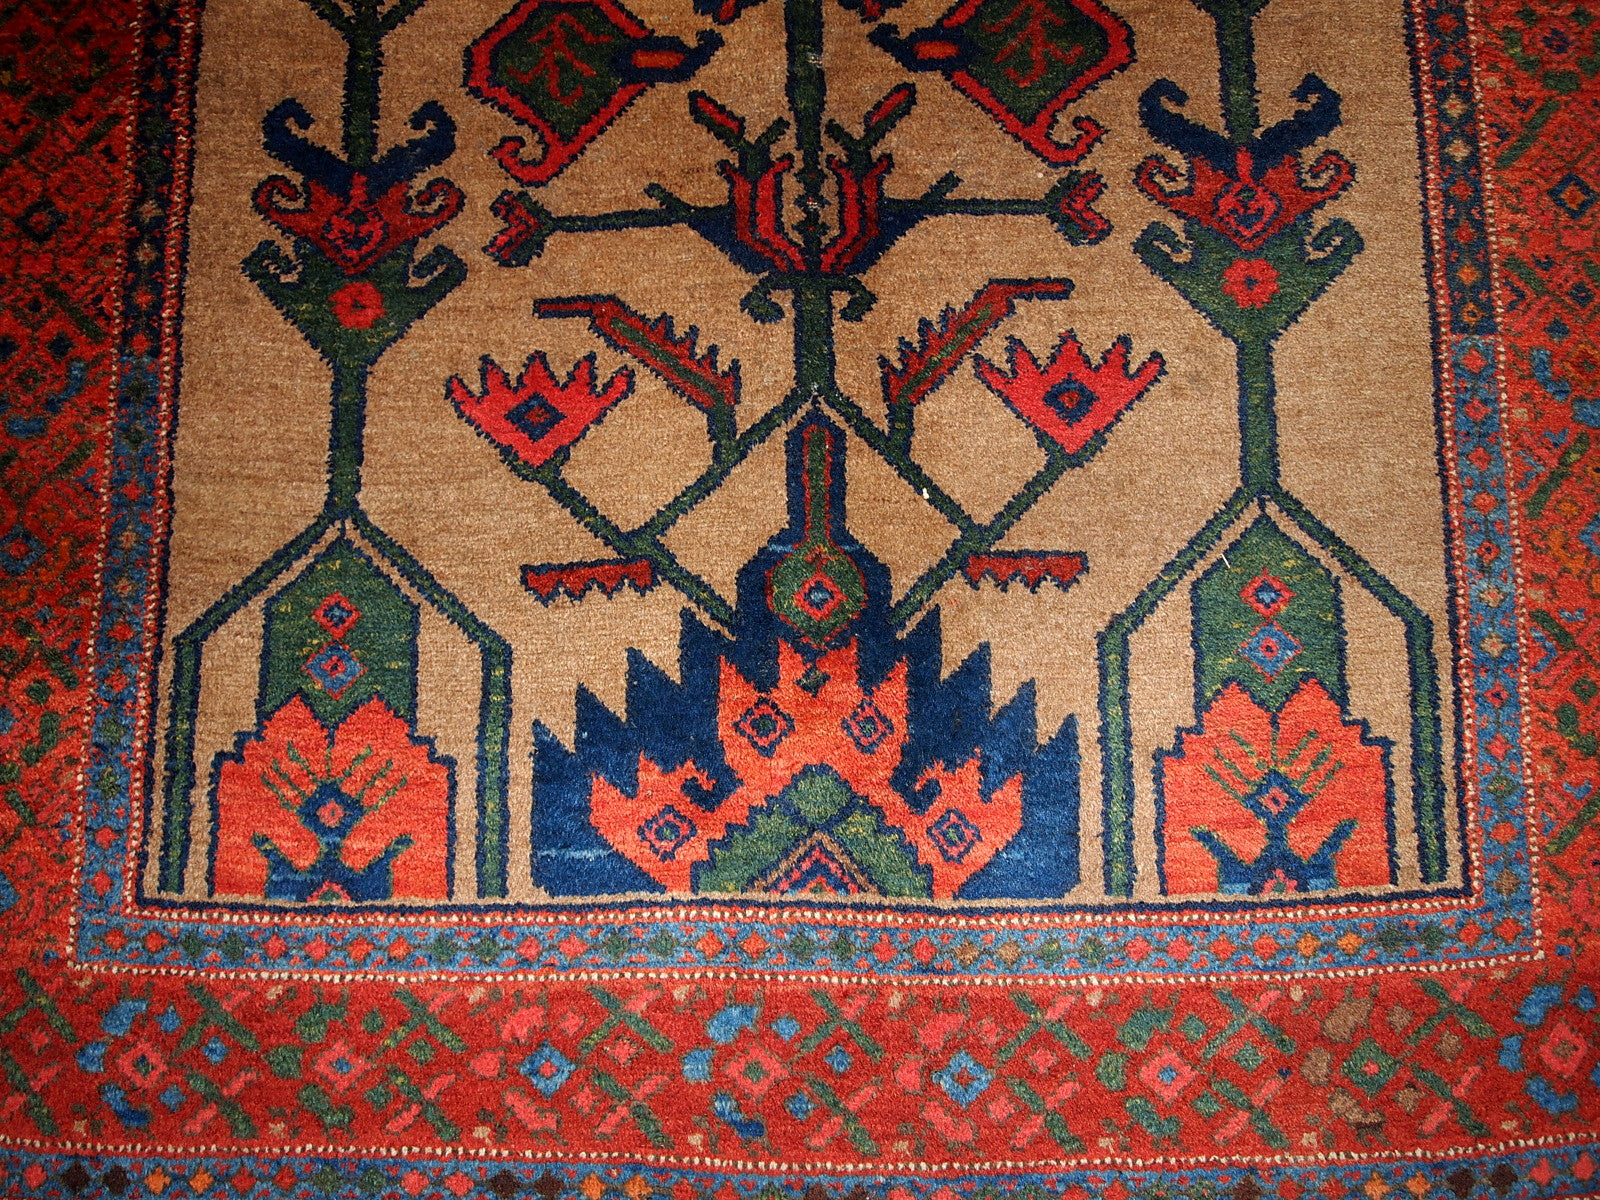 Antique Persian Kurdish rug in light brown background color. Very primitive tribal design with large ornaments. The rug is in original good condition.